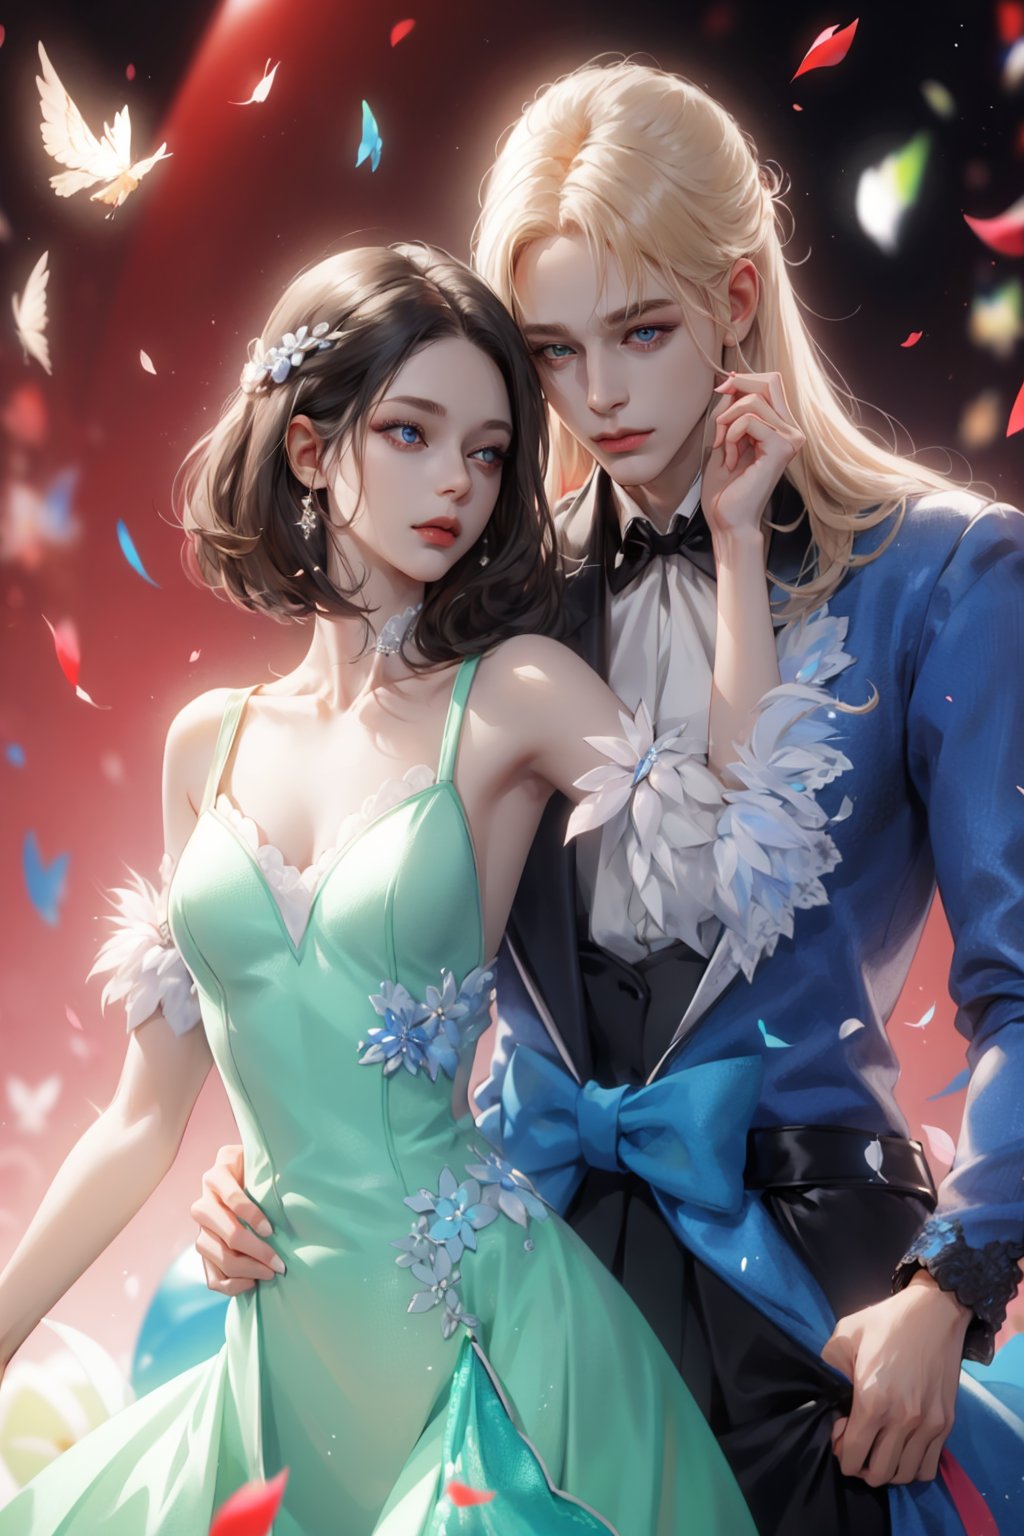 (asterpiece:1.2, best quality), (Soft light), (shiny skin), 2 person, 2 people, romance, couple, blonde_hair, long_hair_girl, short_black_hair, short_black_hair_boy, long dress, party, ballroom, ballgown, eye_lashes, collarbone, victorian, blue eyes, crowed, ball party, blue and black dress, dancing, flowers petals,weiboZH,hll, red background